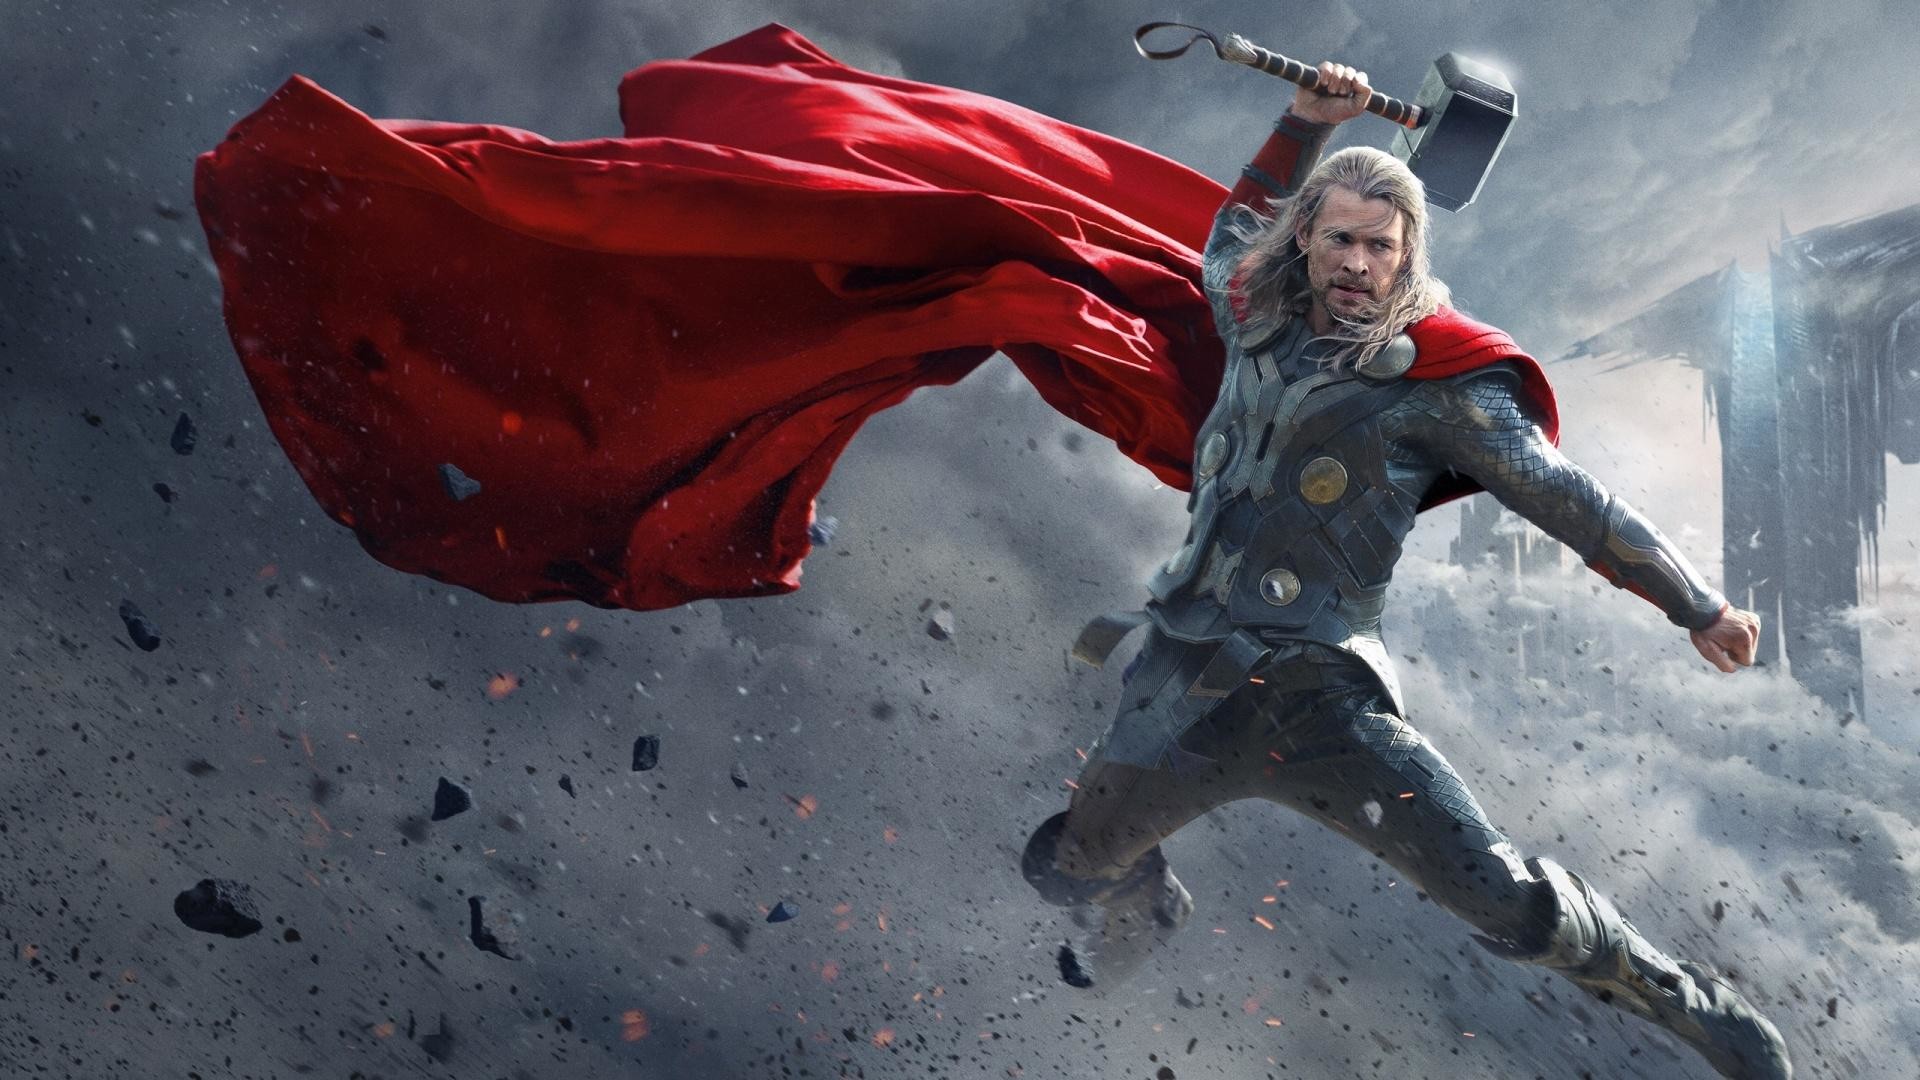 1920x1080 ... HD Wallpaper and images Free Desktop Thor Wallpapers and images ...